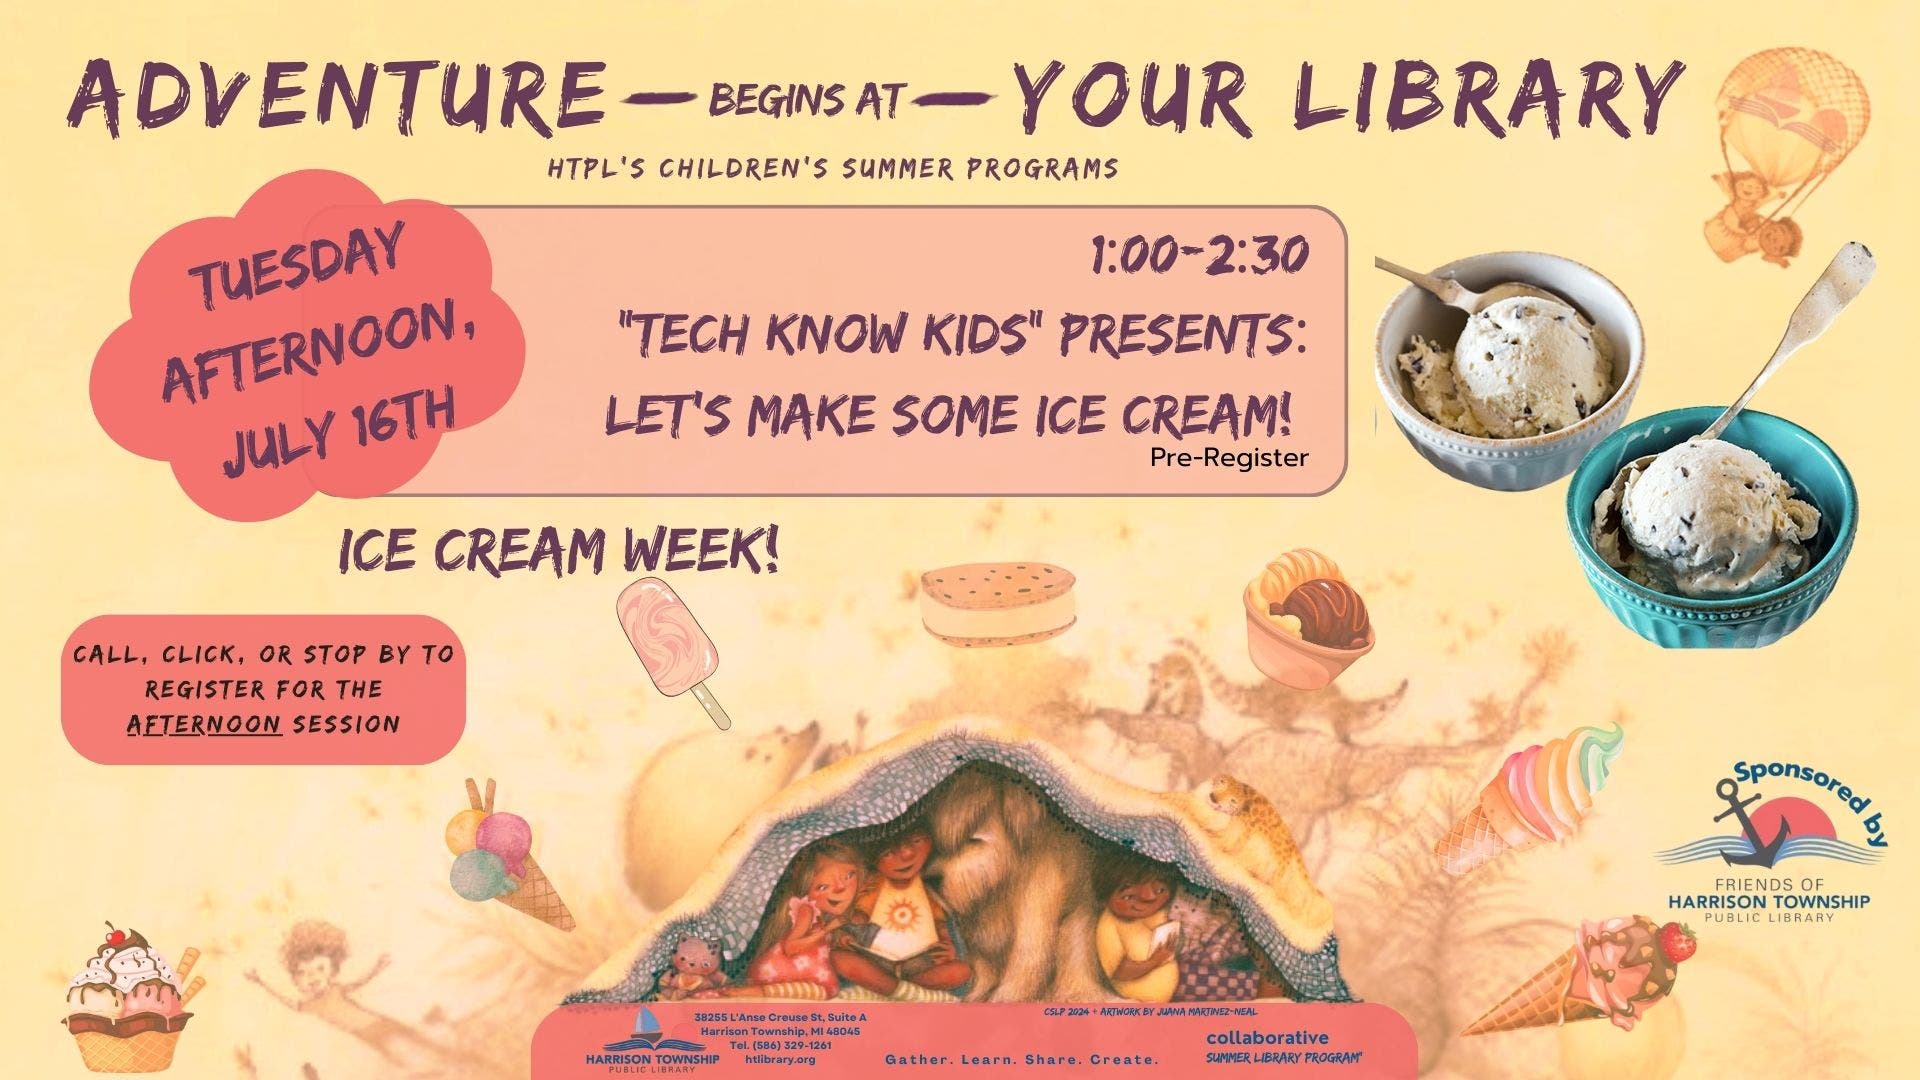 Tech Know Kids Presents: Let's Make Some Ice Cream!